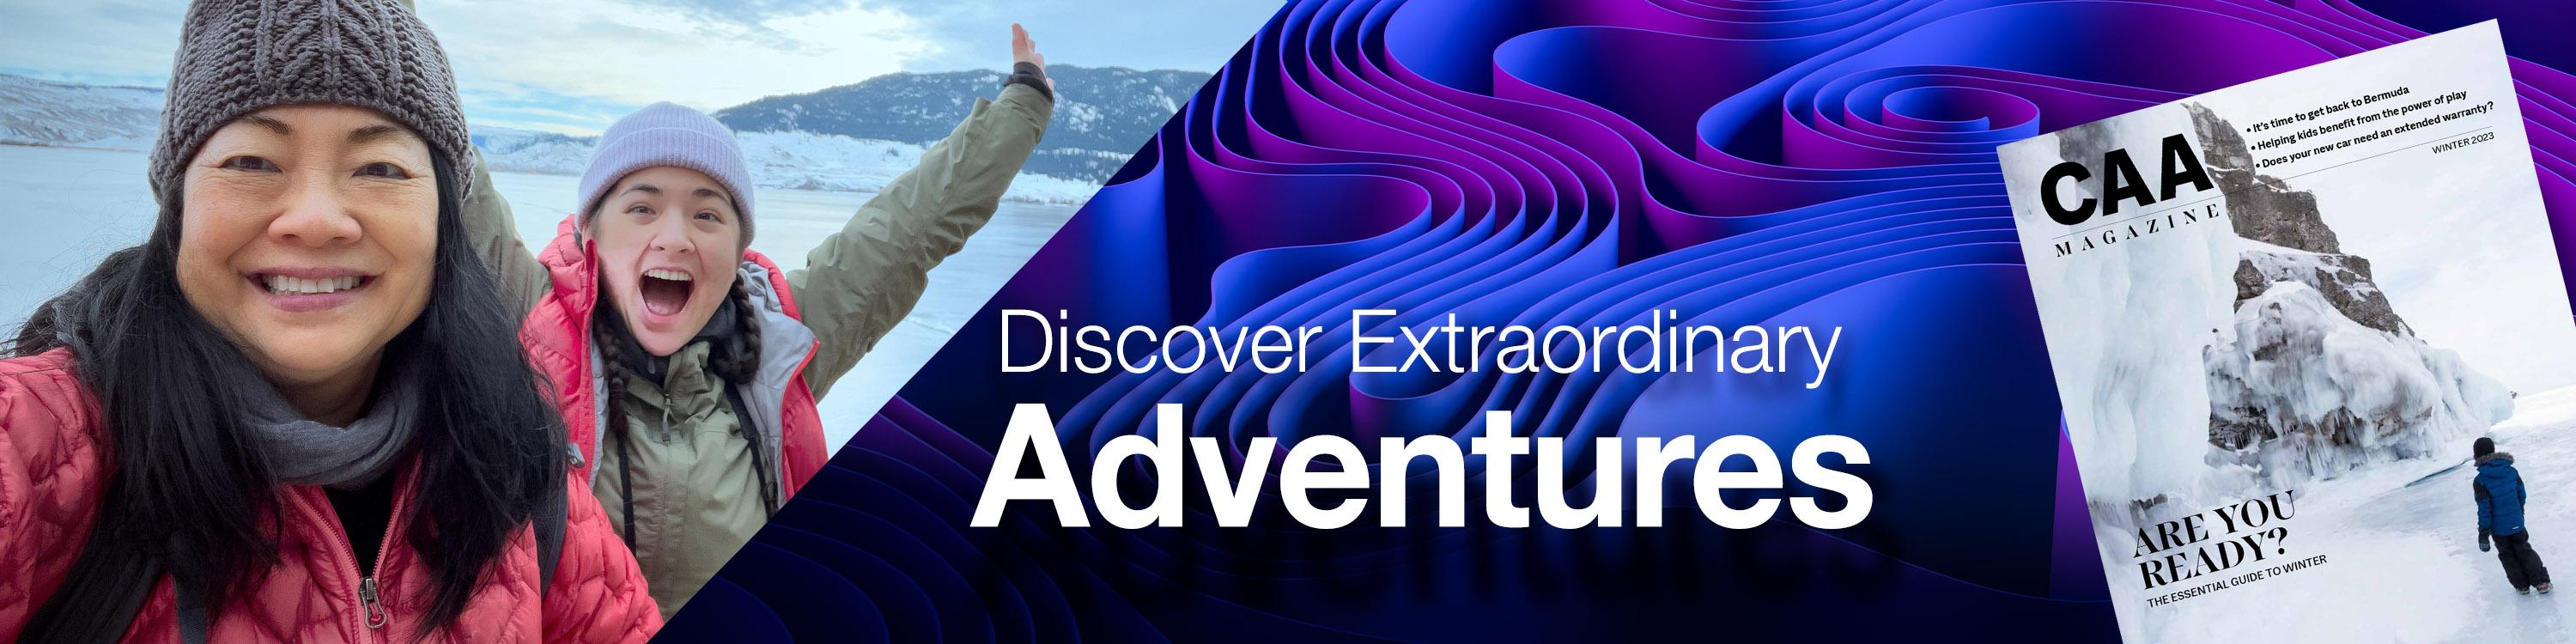 Discover New Adventures